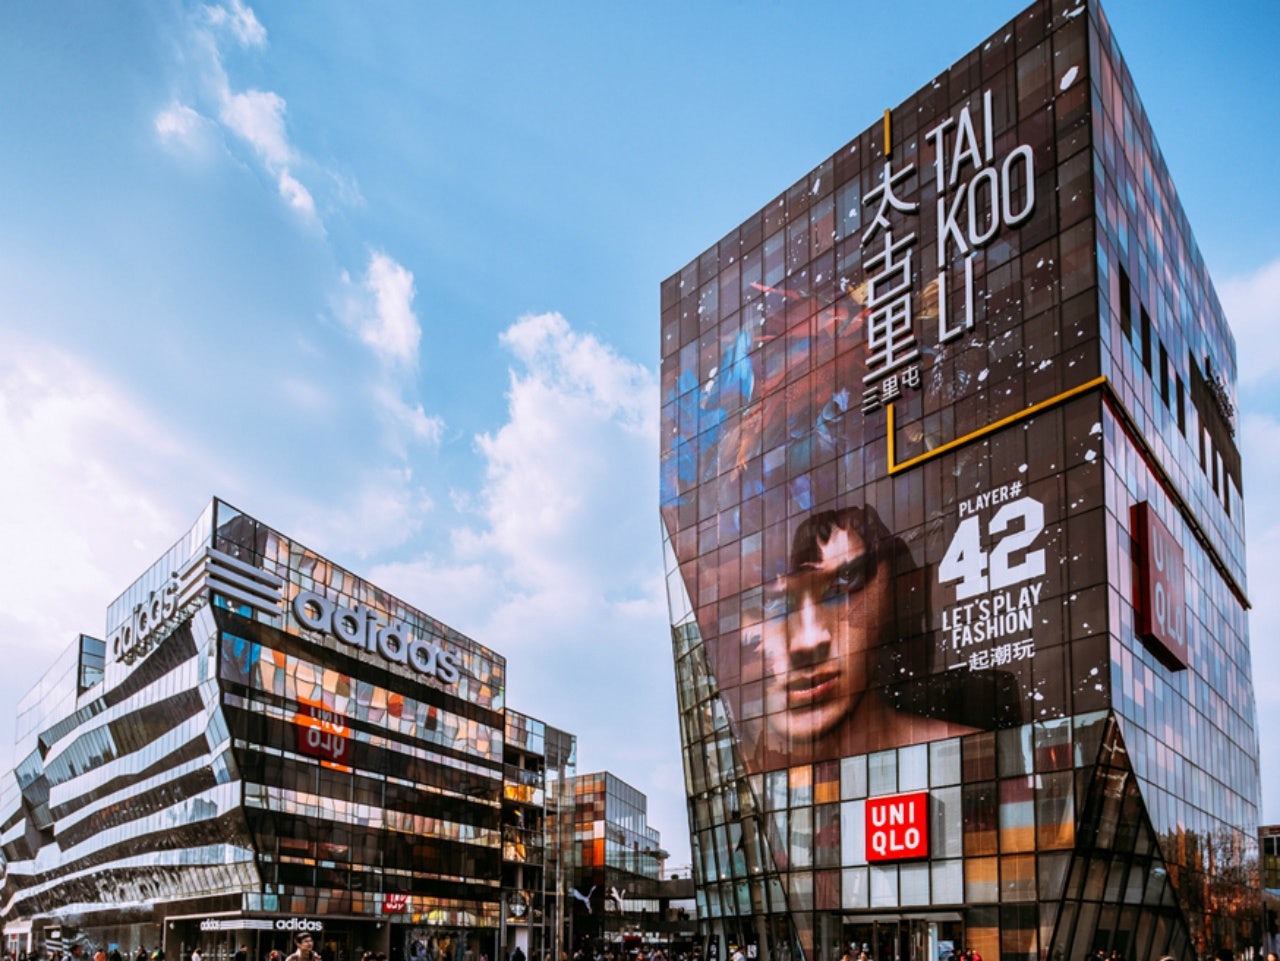 Taikoo Li's towering Uniqlo and Adidas stores are a landmark in the Sanlitun district. (Courtesy Photo) 